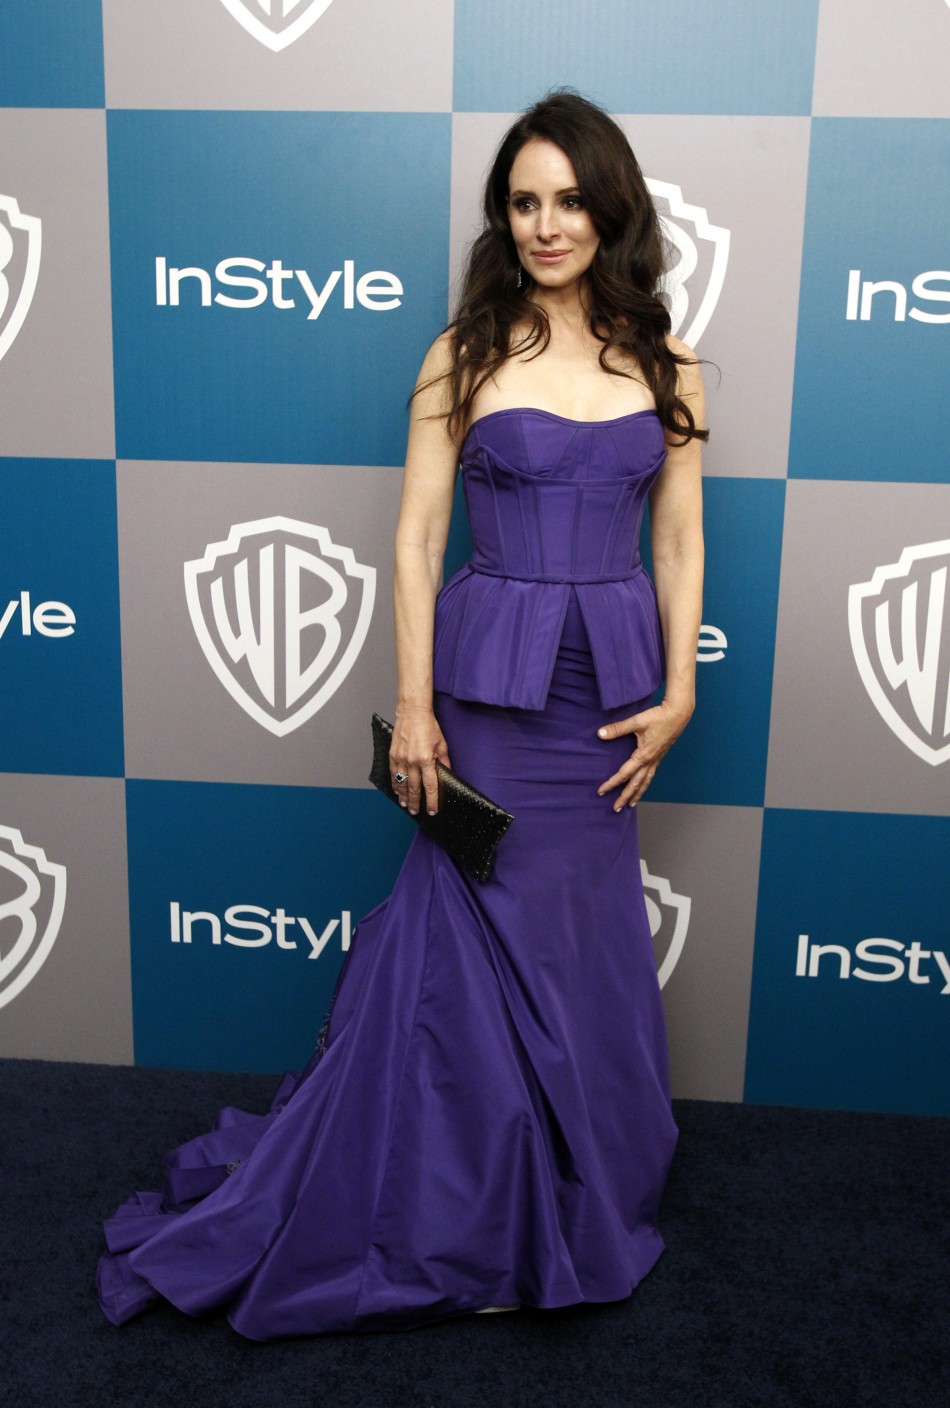 Madeleine Stowe was voted fifth most beautiful woman of 2012 by People magazine